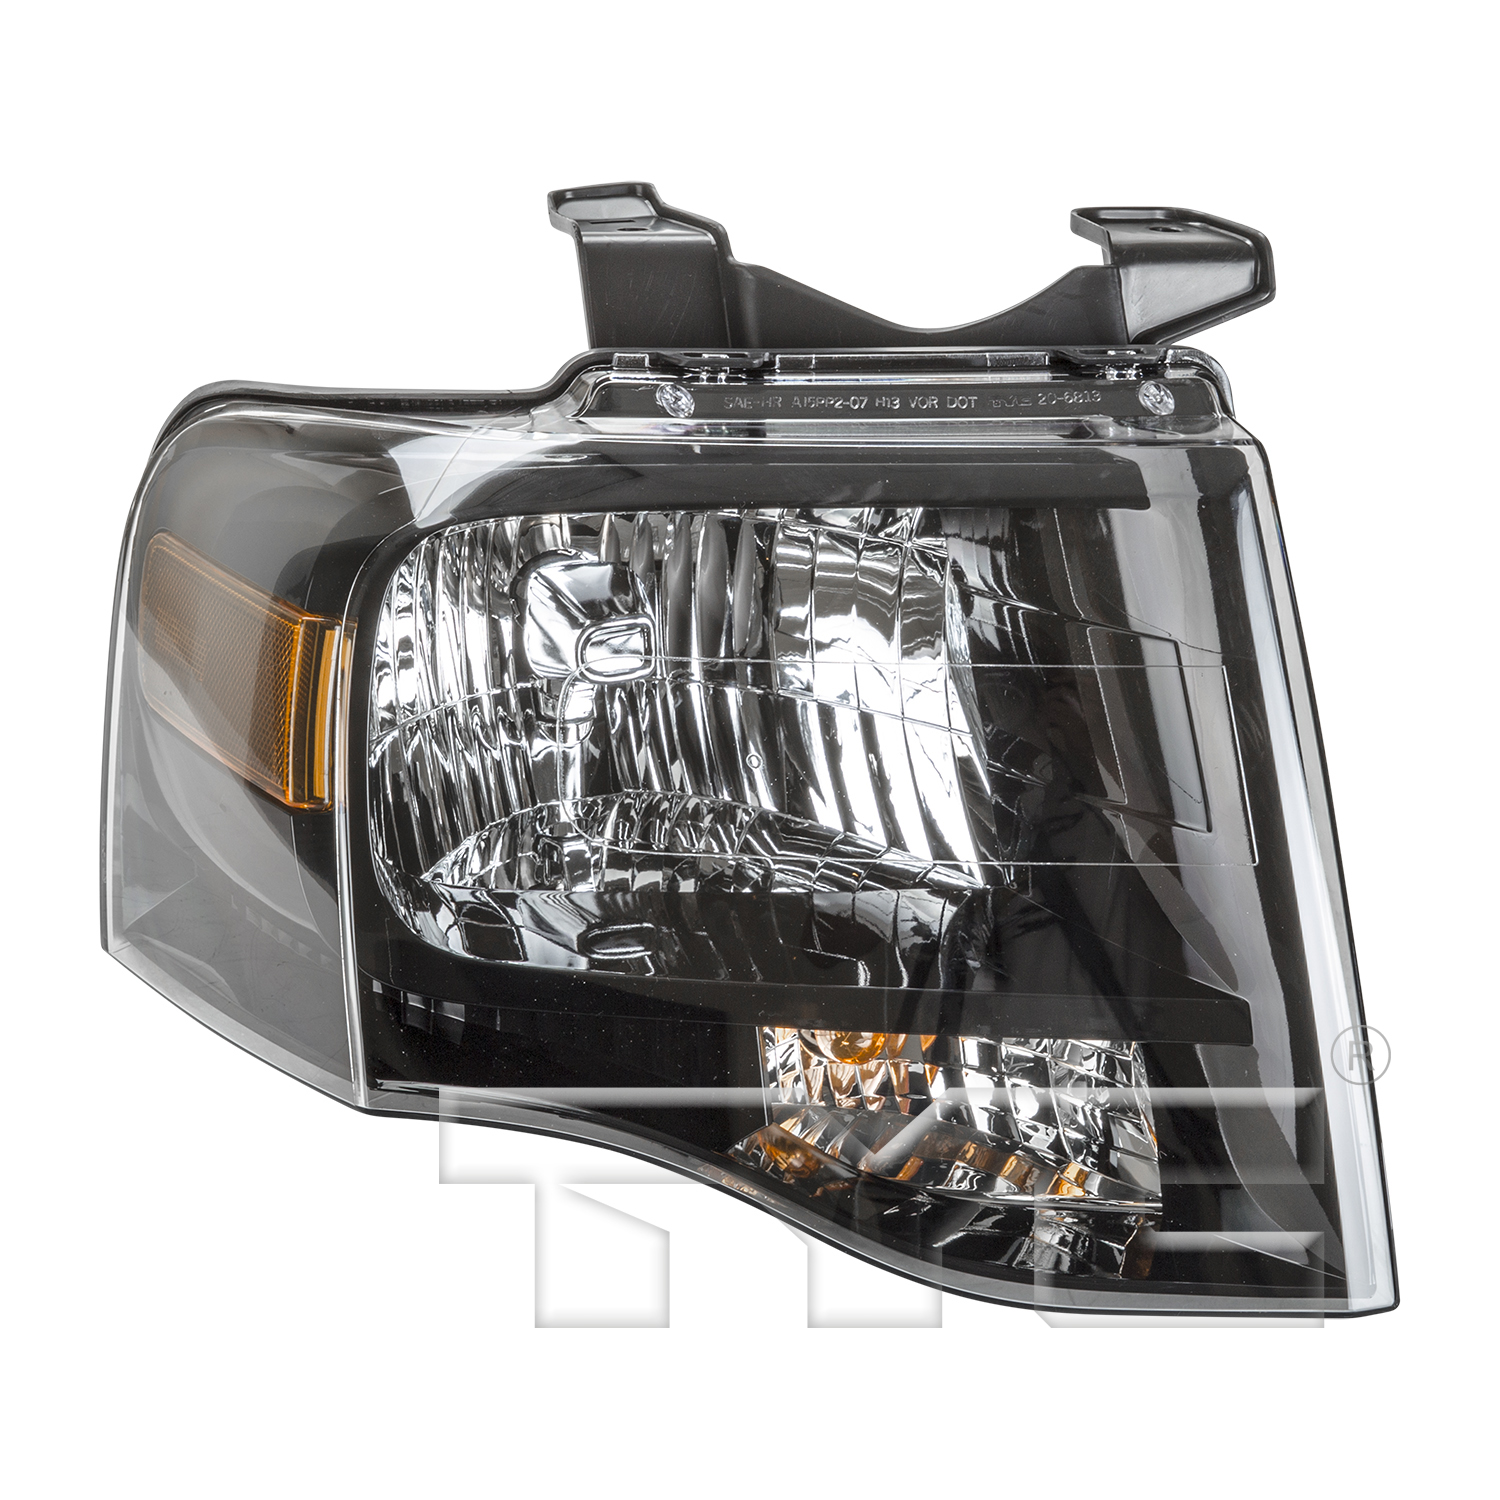 Aftermarket HEADLIGHTS for FORD - EXPEDITION, EXPEDITION,07-14,RT Headlamp assy composite